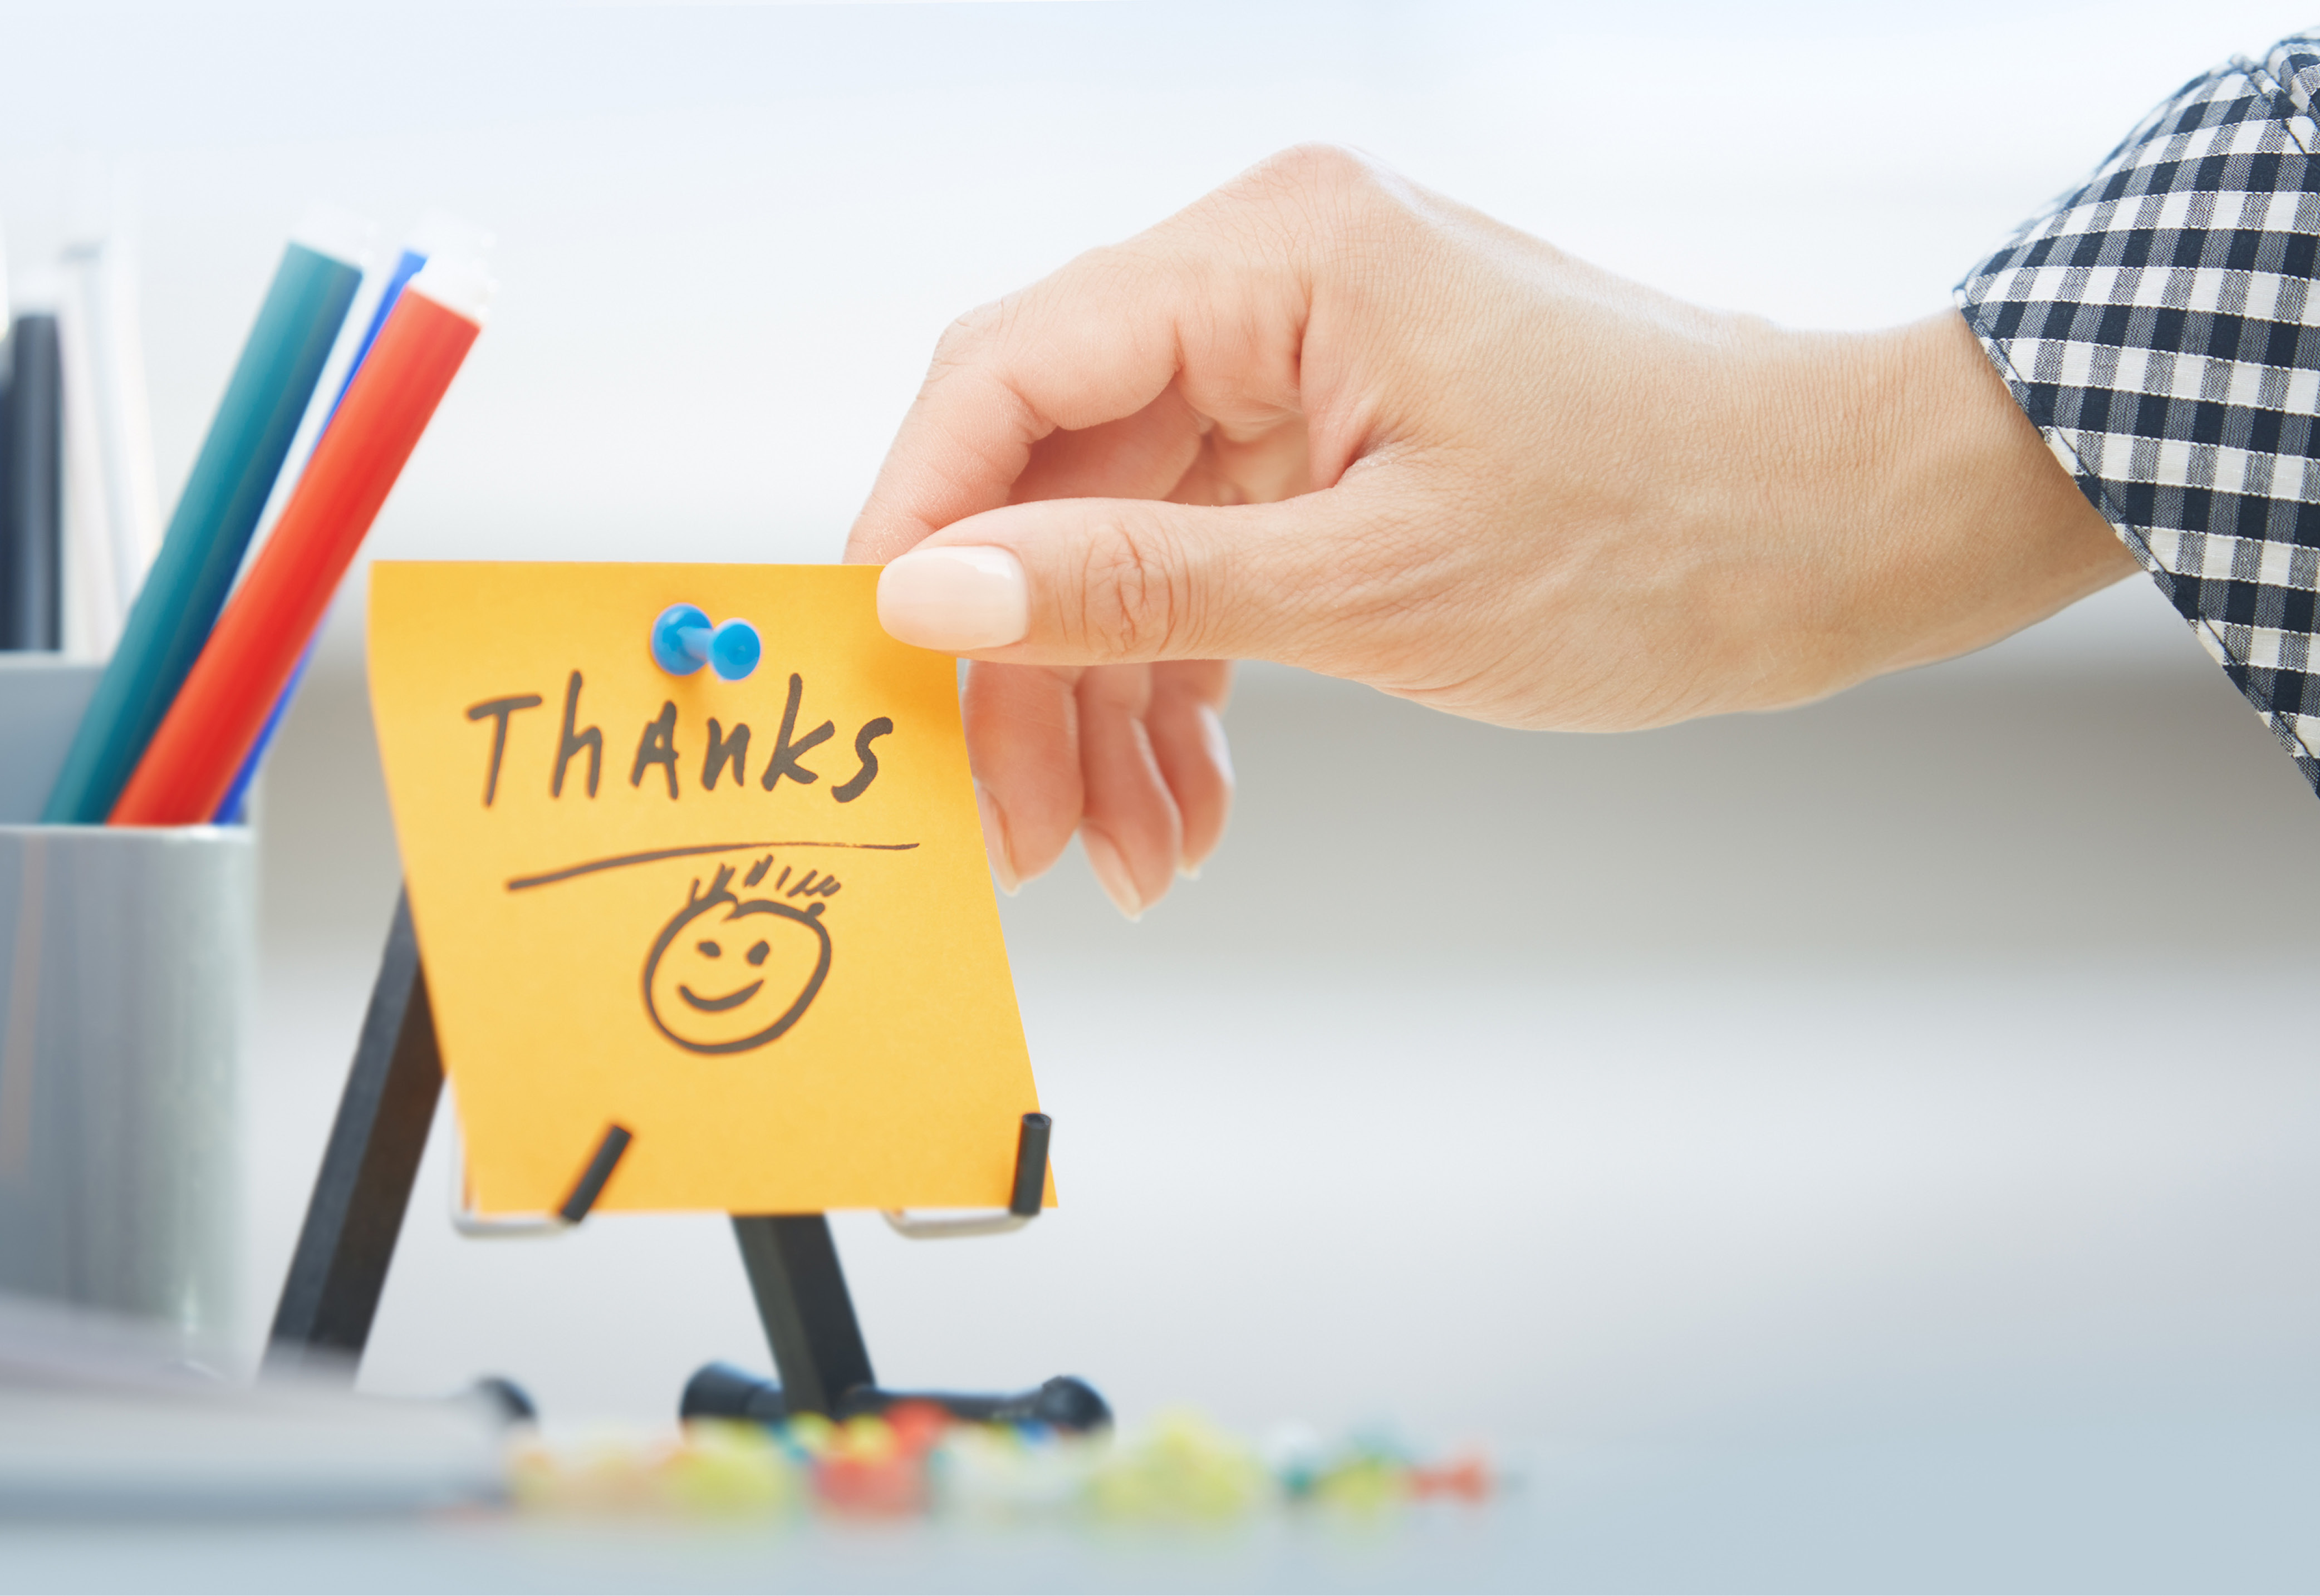 A person holding a sticky note that says "thanks" with a smiley face